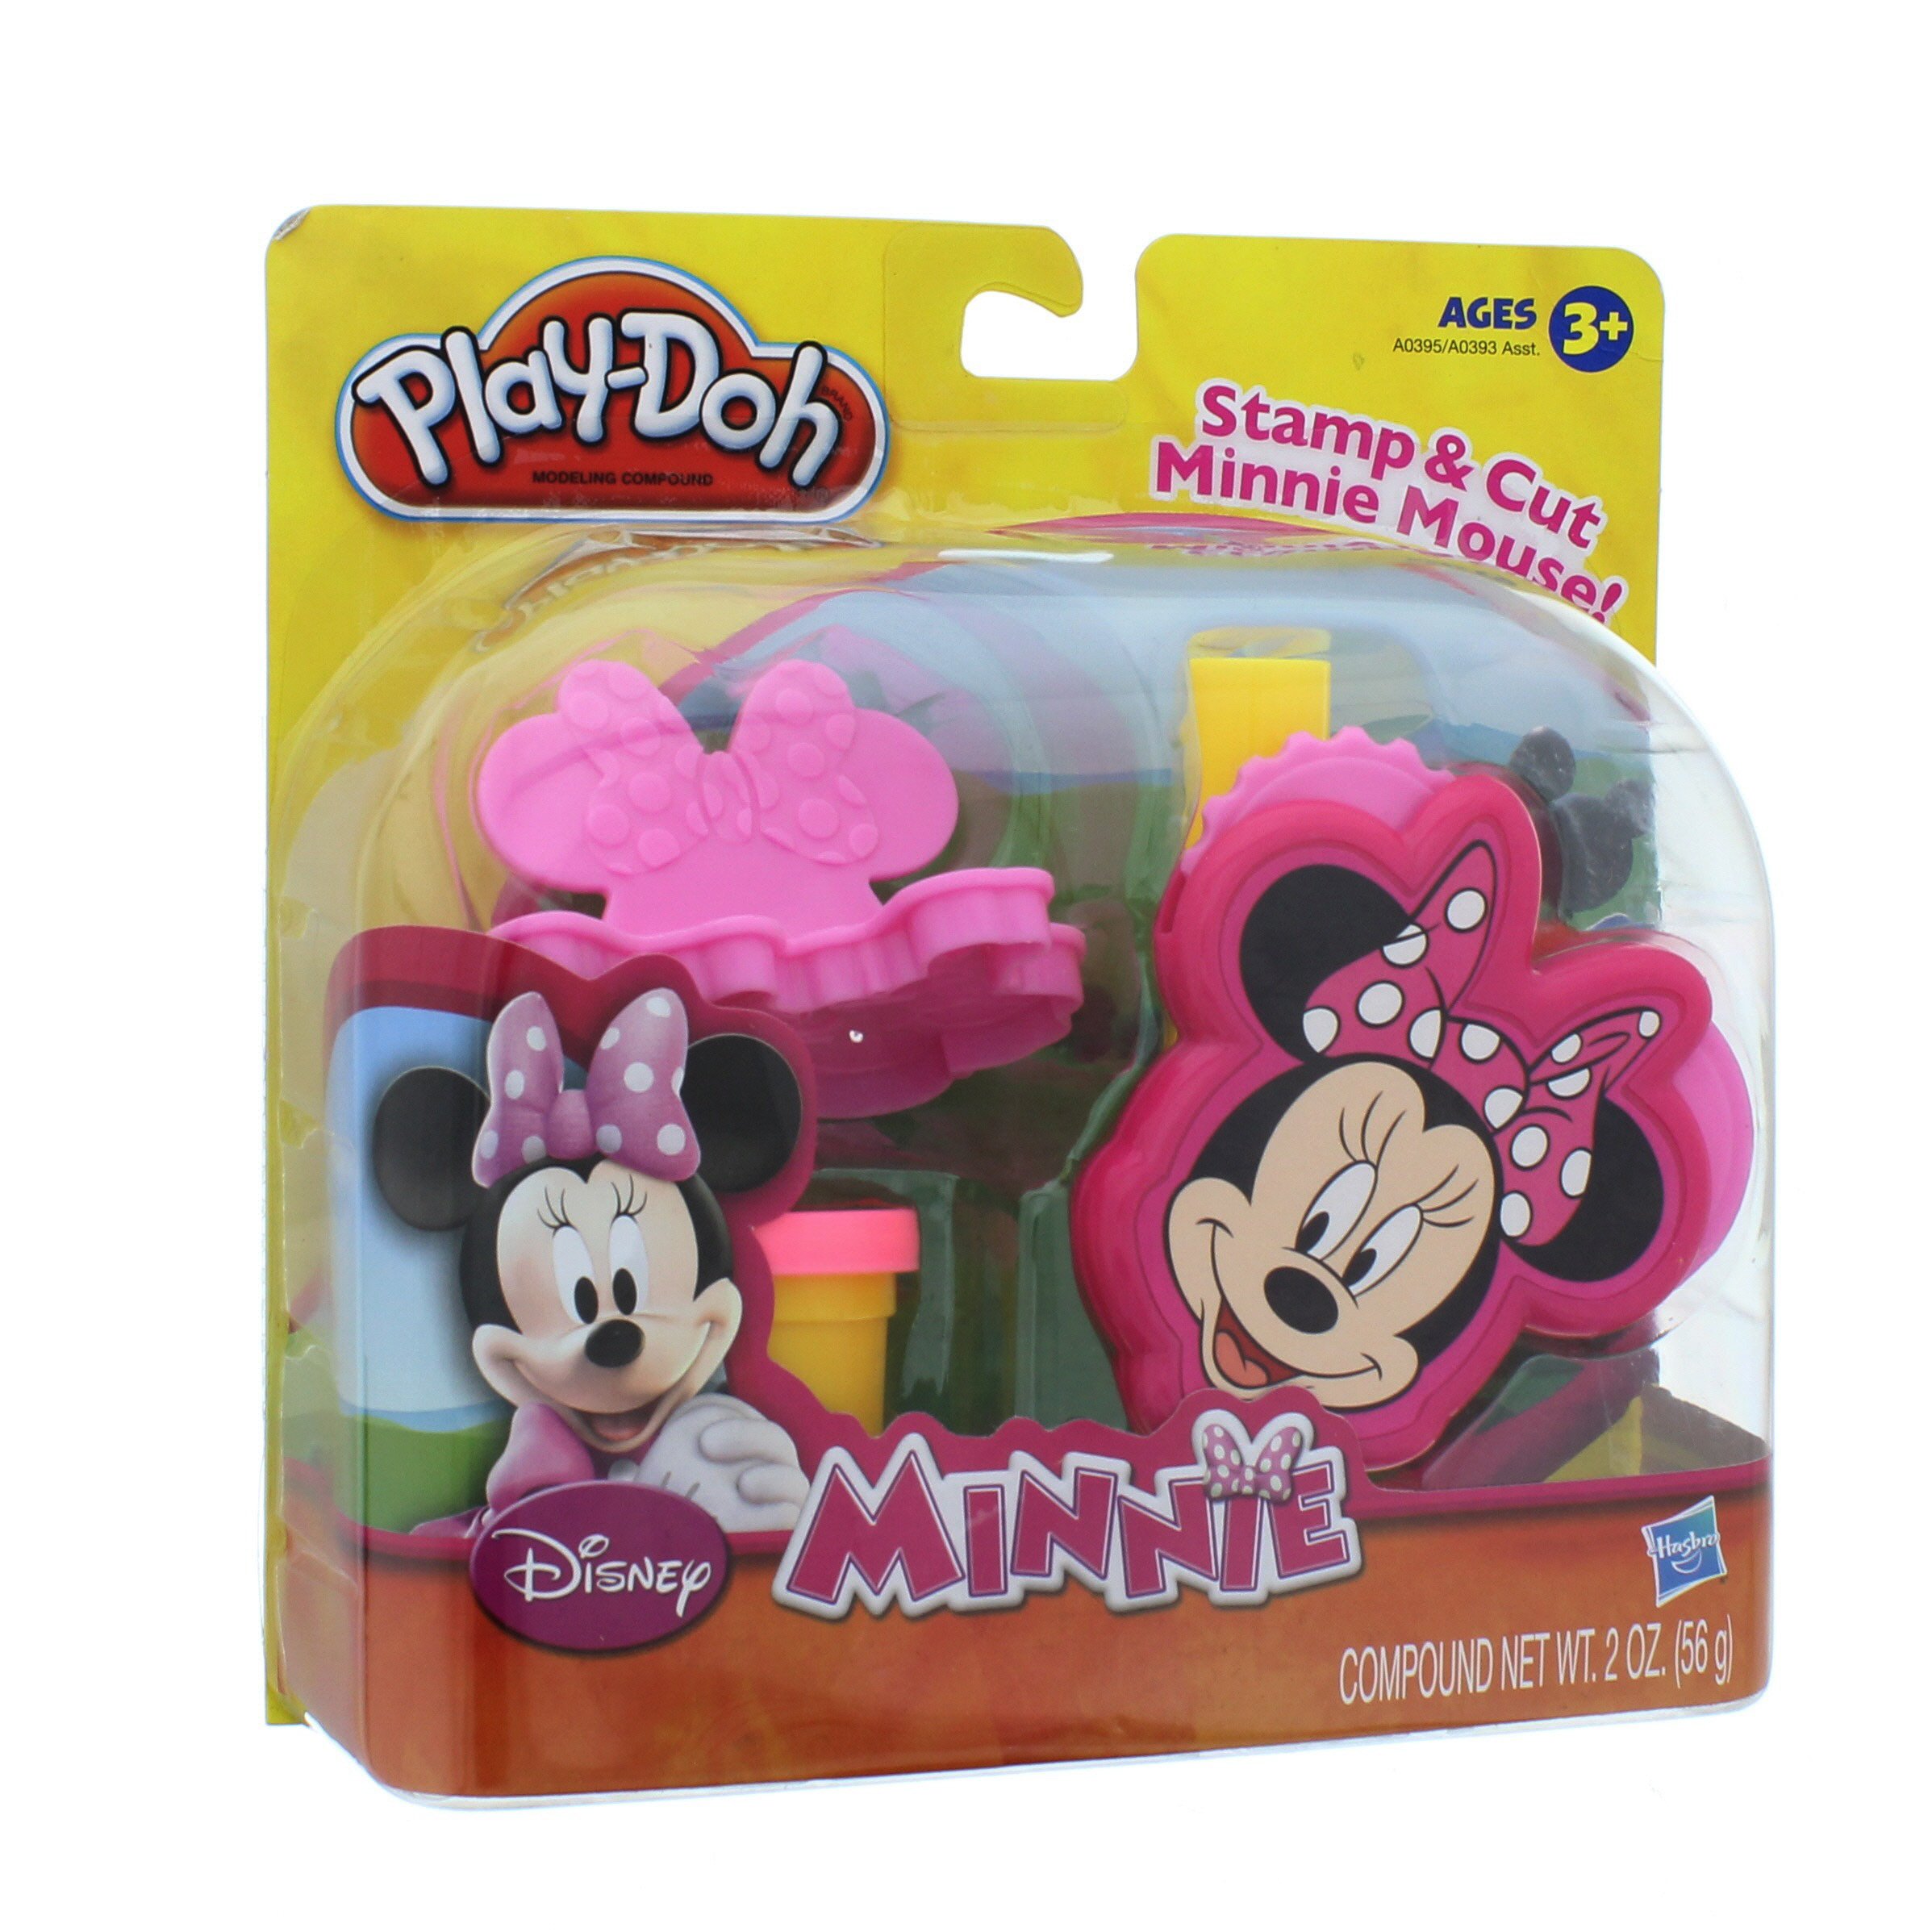 mickey mouse play doh